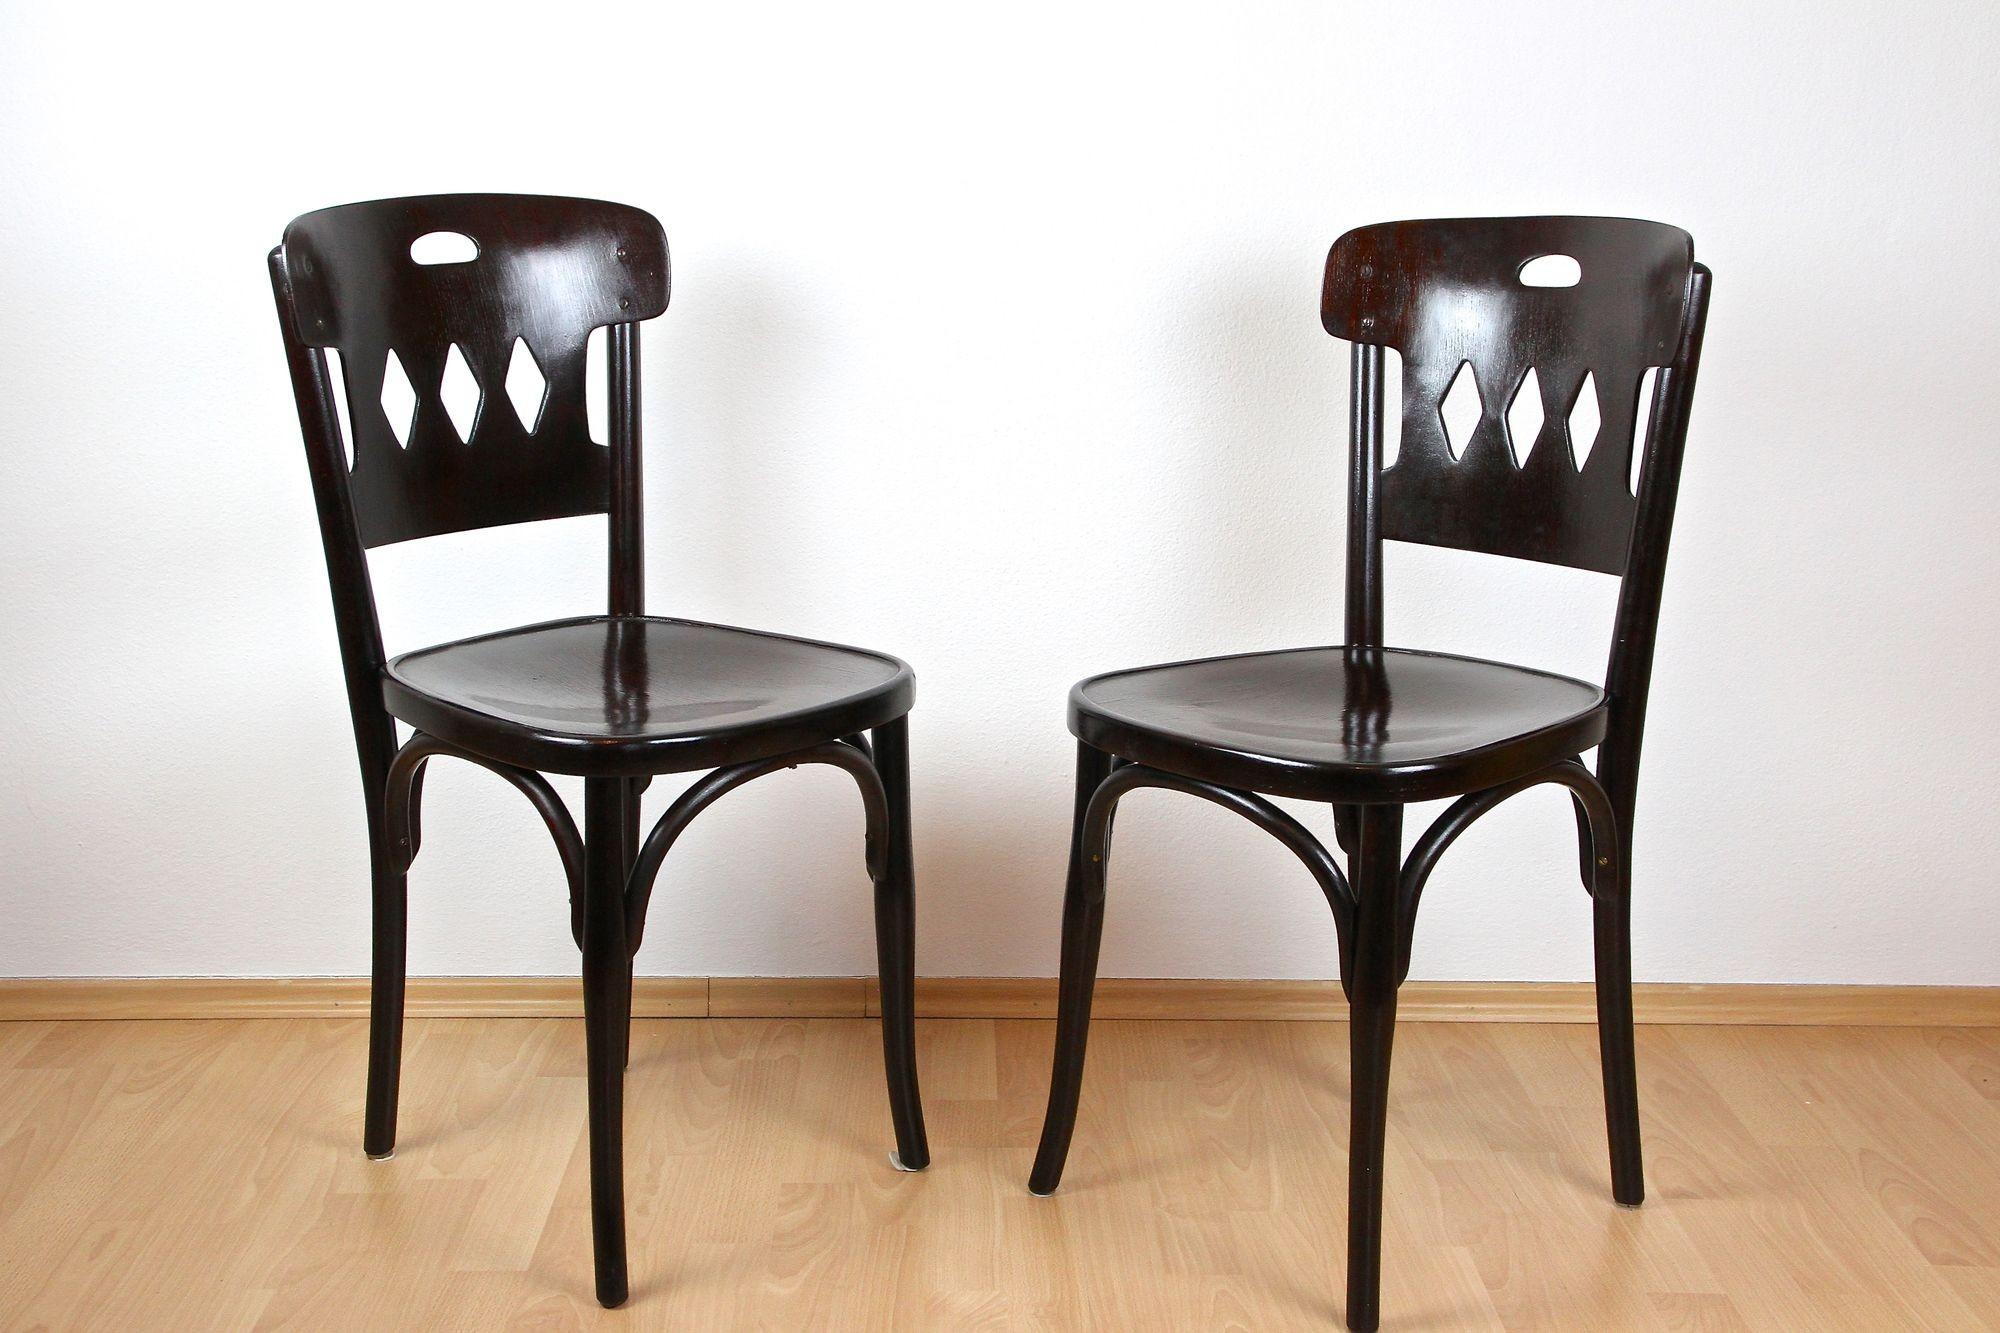 20th Century Pair Of Art Nouveau Bentwood Chairs by J&J Kohn, Vienna ca. 1910 For Sale